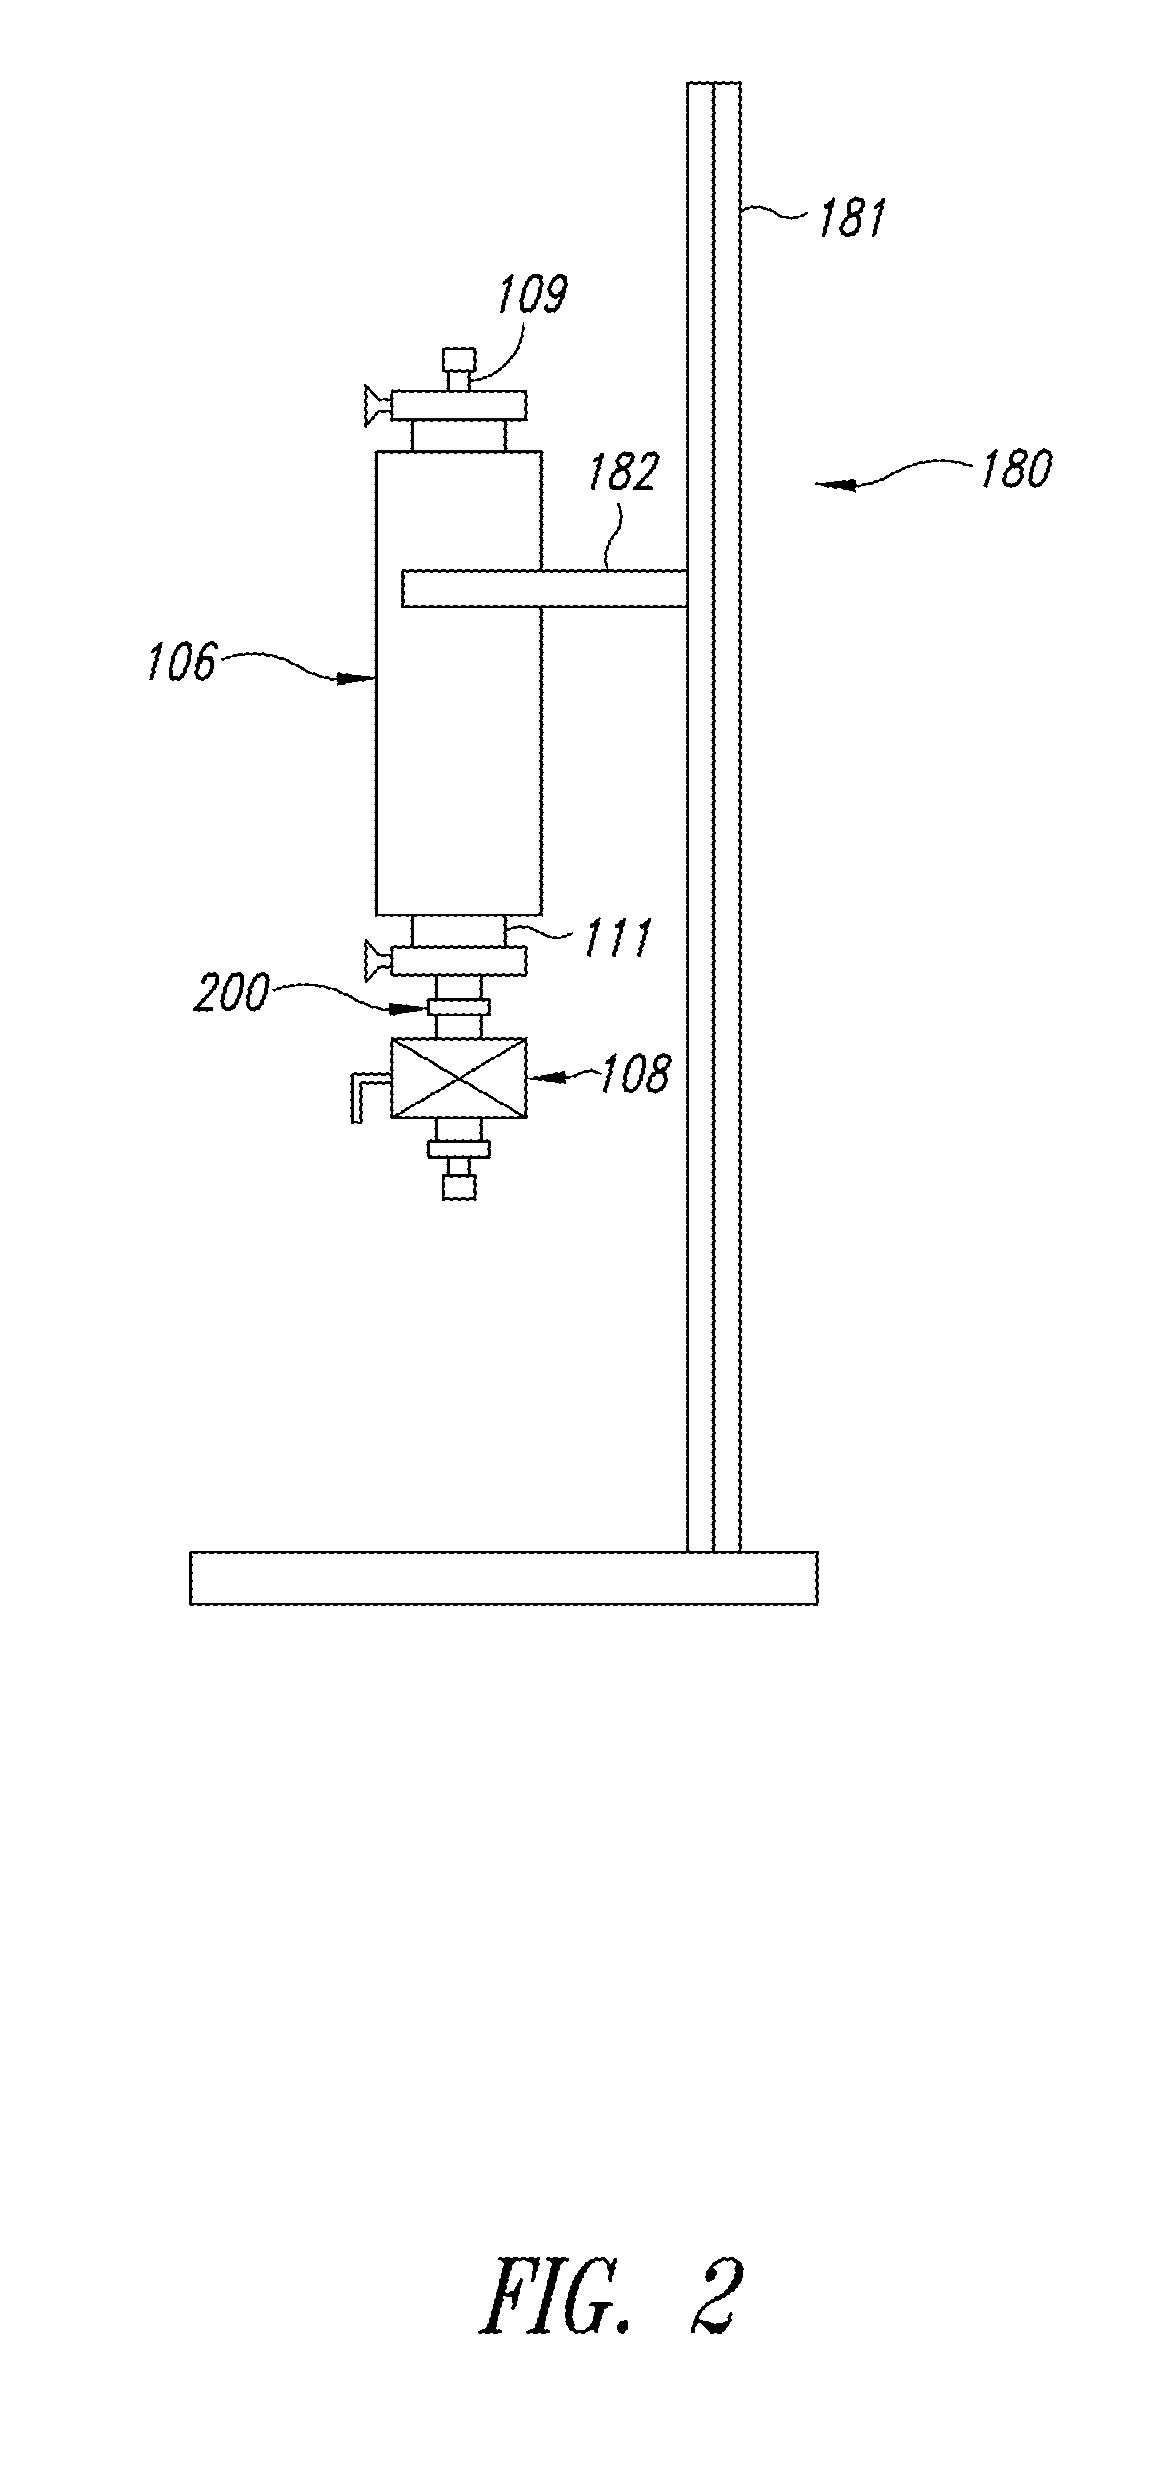 Enhanced essential oil extraction, recovery, and purge system and method